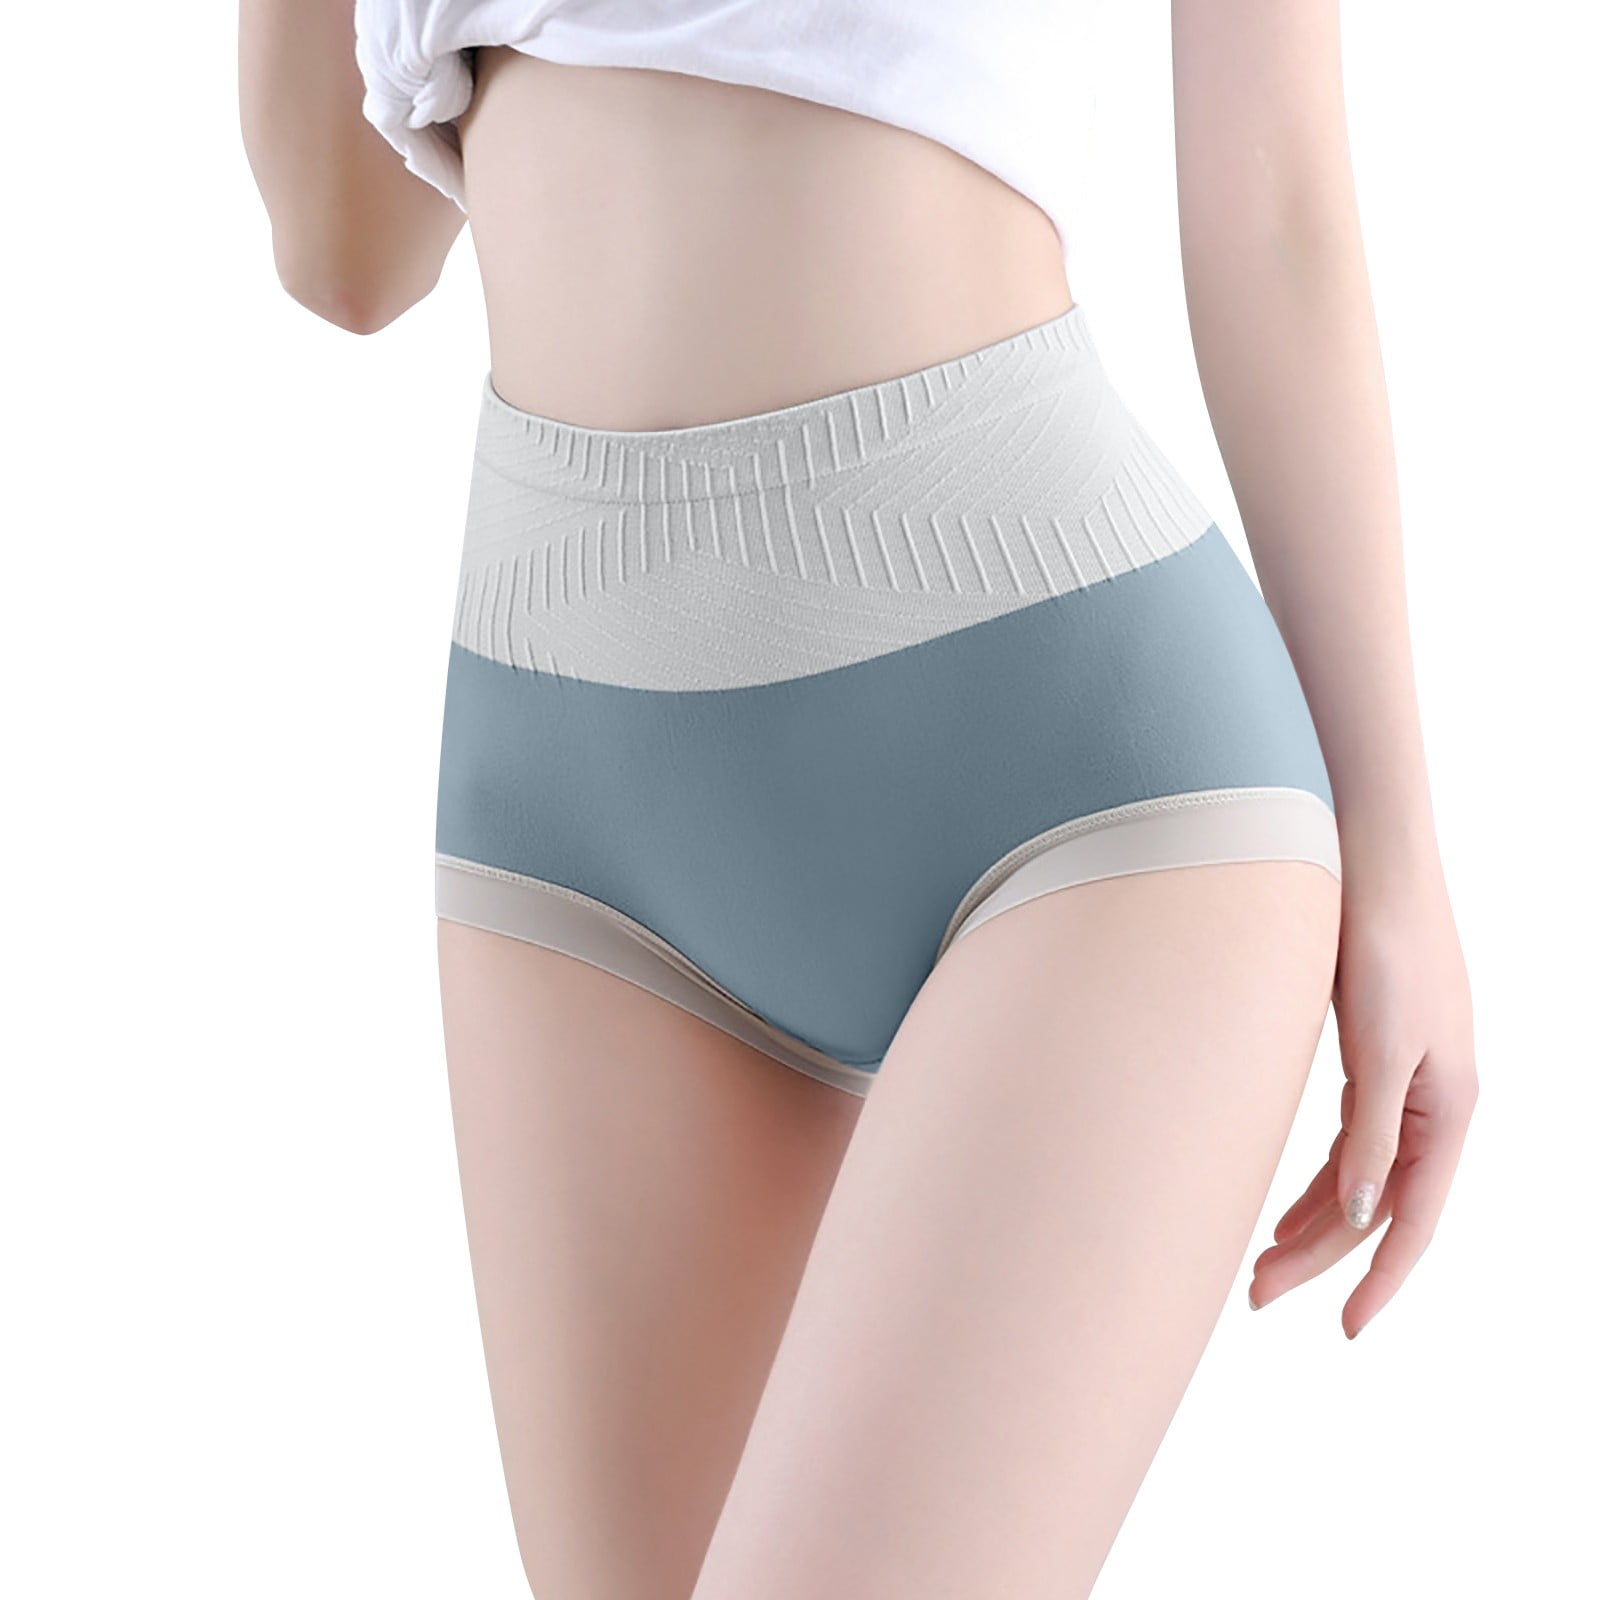 LEEy-world Women'S Lingerie Waist Of Pure Cotton Underwear Women Contracted  Comfortable Breathable Fork Girls Briefs,F